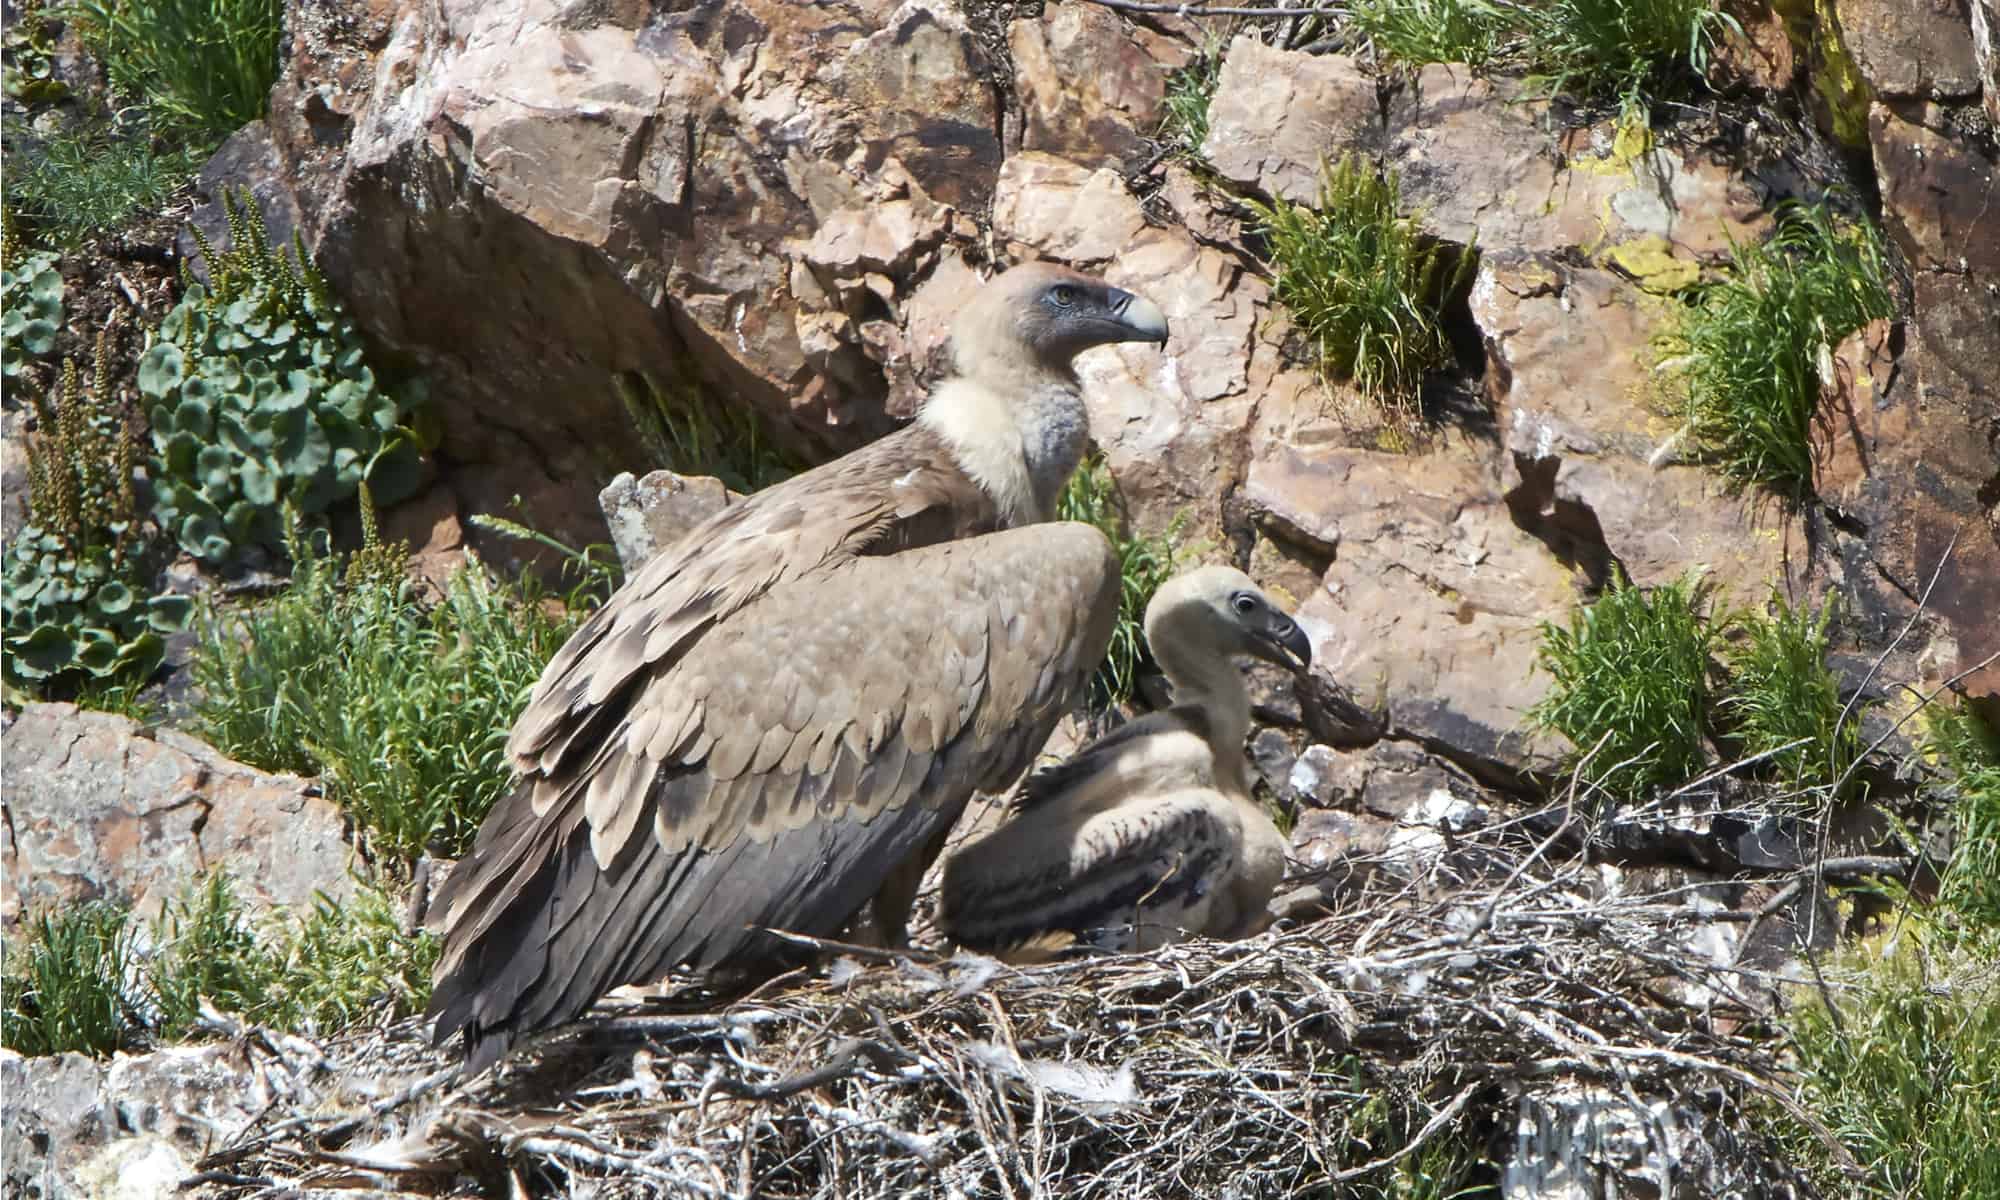 Griffon vulture and a chick in her nest. During the breeding season, the birds build nests of twigs on cliff ledges hundreds of feet high.